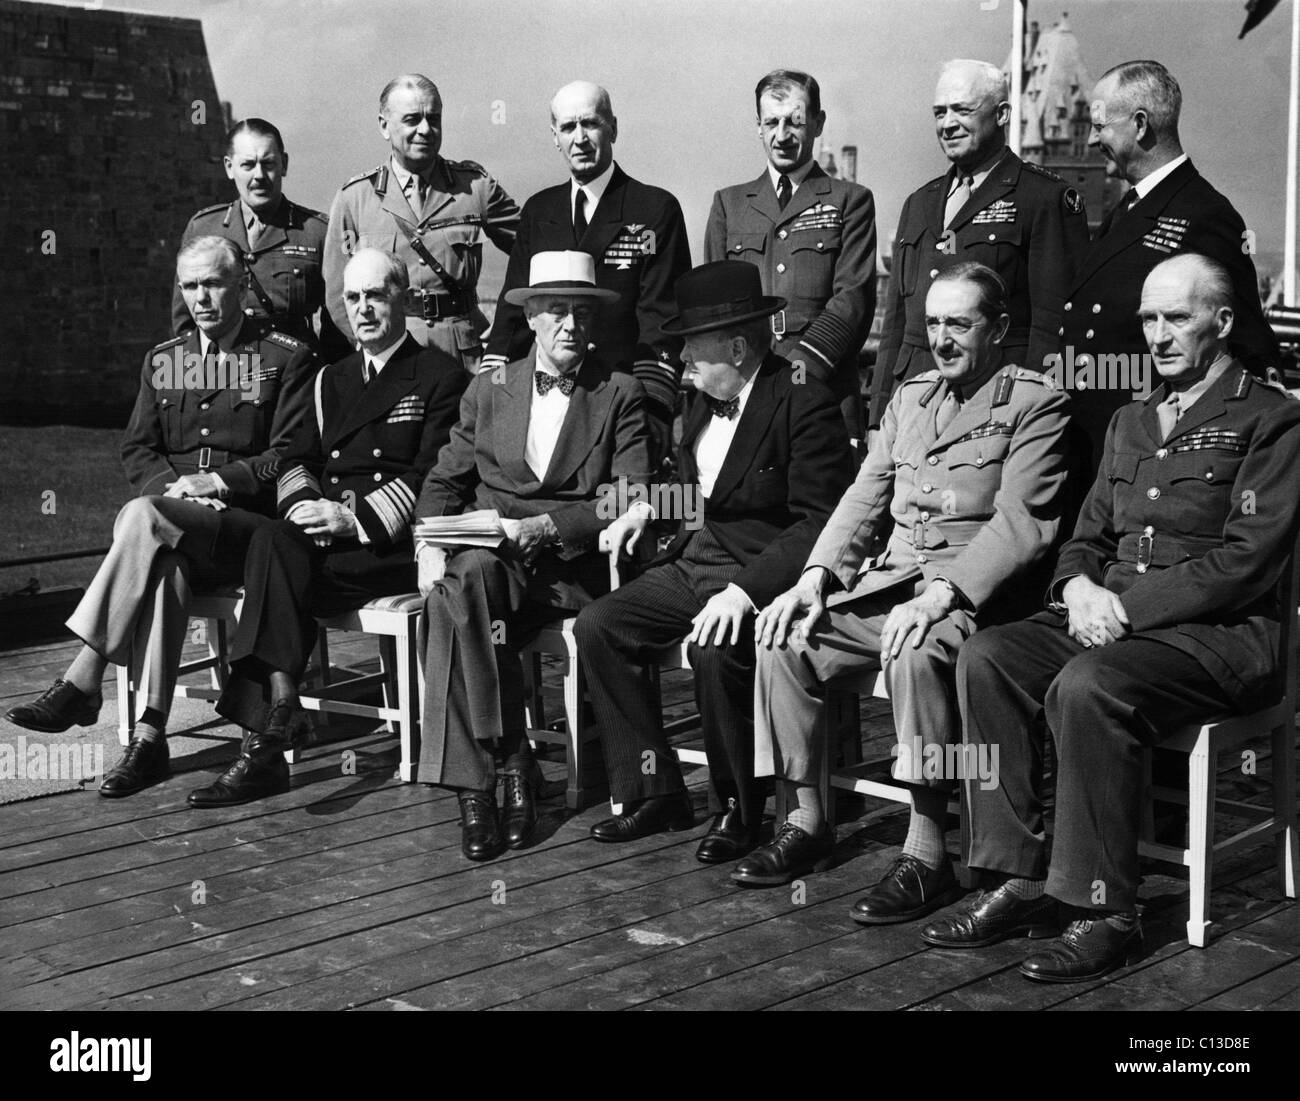 World War II. Seated, from left: George Marshall, William Leahy, Franklin Delano Roosevelt, Winston Churchill, Alan Brooke, John Dill. Standing, from left: Roger Hollis, Hastings Ismay, Ernest King, Charles Portal, Henry Arnold, Andrew Cunningham, at the Second Quebec Conference, (codenamed OCTAGON), Quebec City, Canada, September 1944. Stock Photo